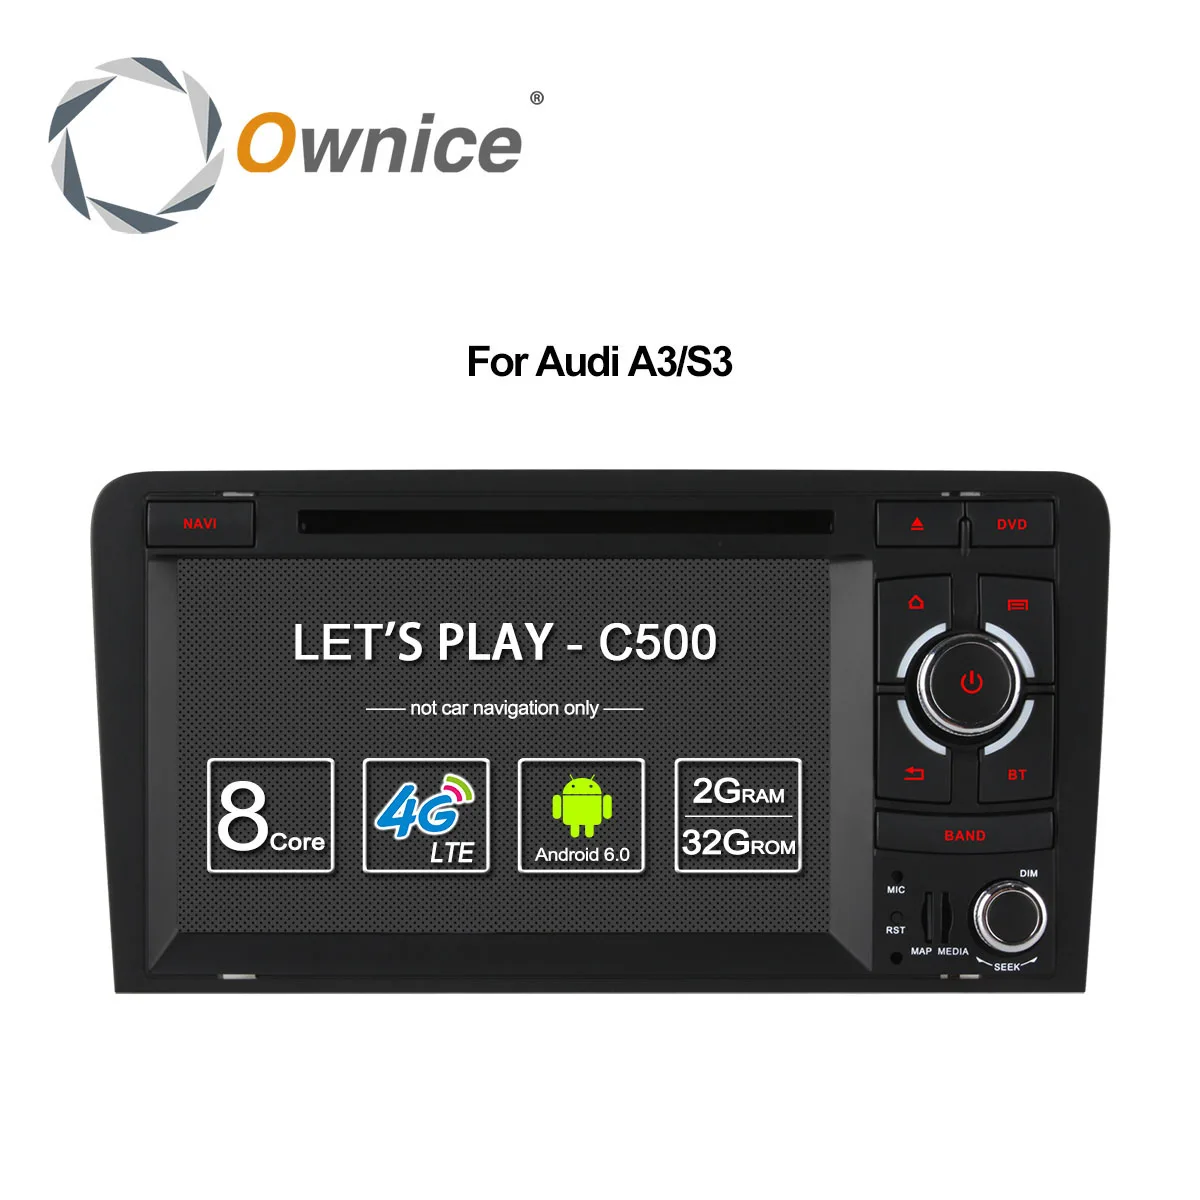 

Ownice C500 Octa Core 4G SIM LTE Android 6.0 2 Din 7" Car DVD Player For Audi A3 S3 2004-2011 Radio GPS Navi BT 2GB RAM 32GB ROM